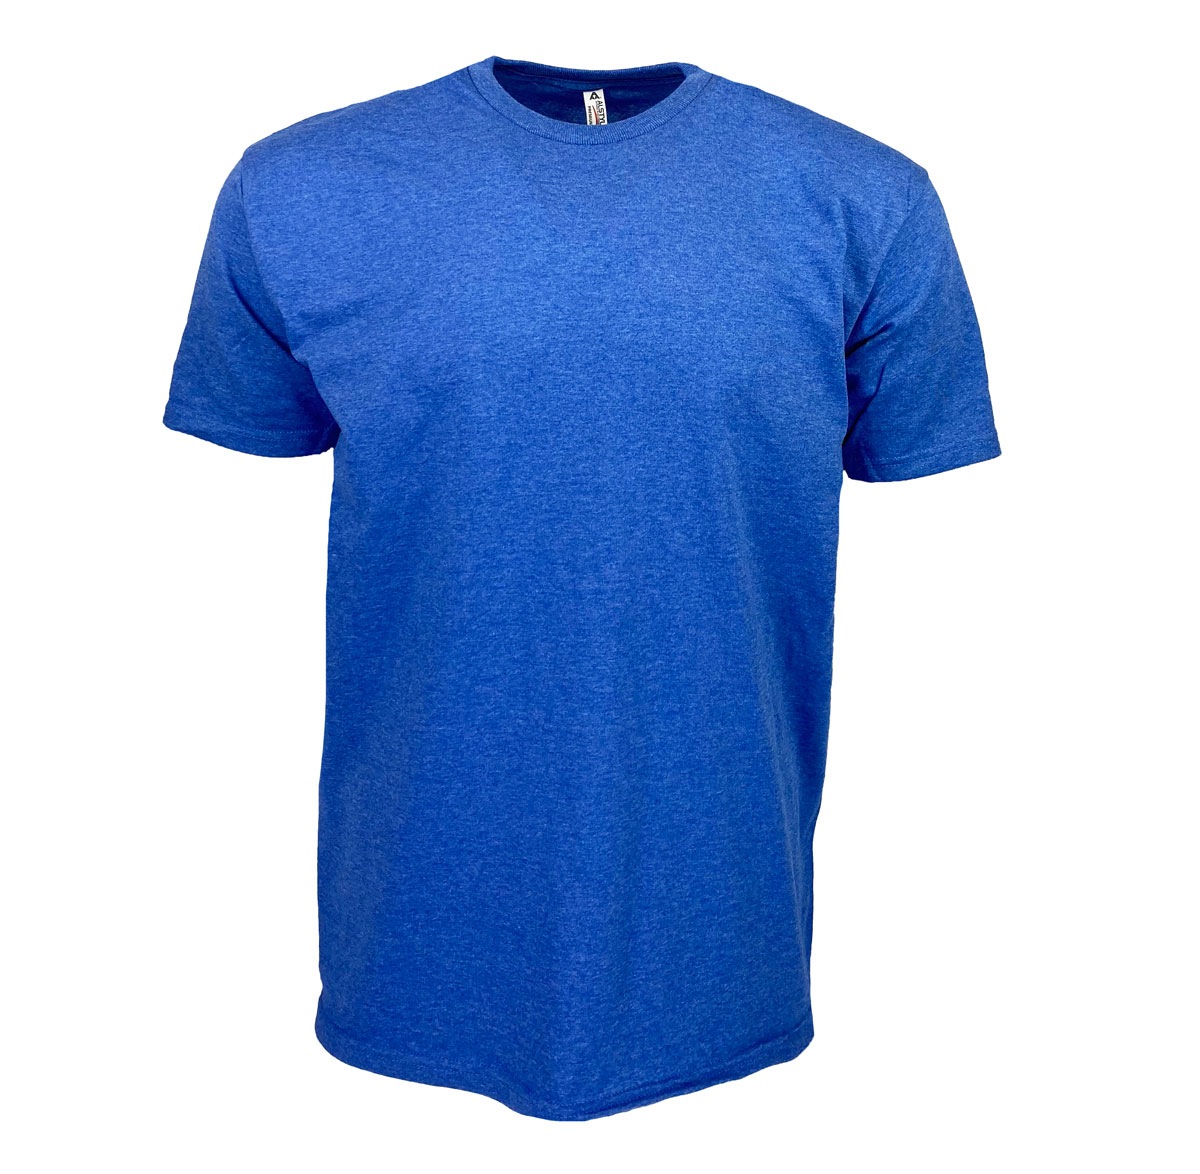 Alstyle Midweight T Shirts-RG Riley Wholesale Off Price Clothing ...